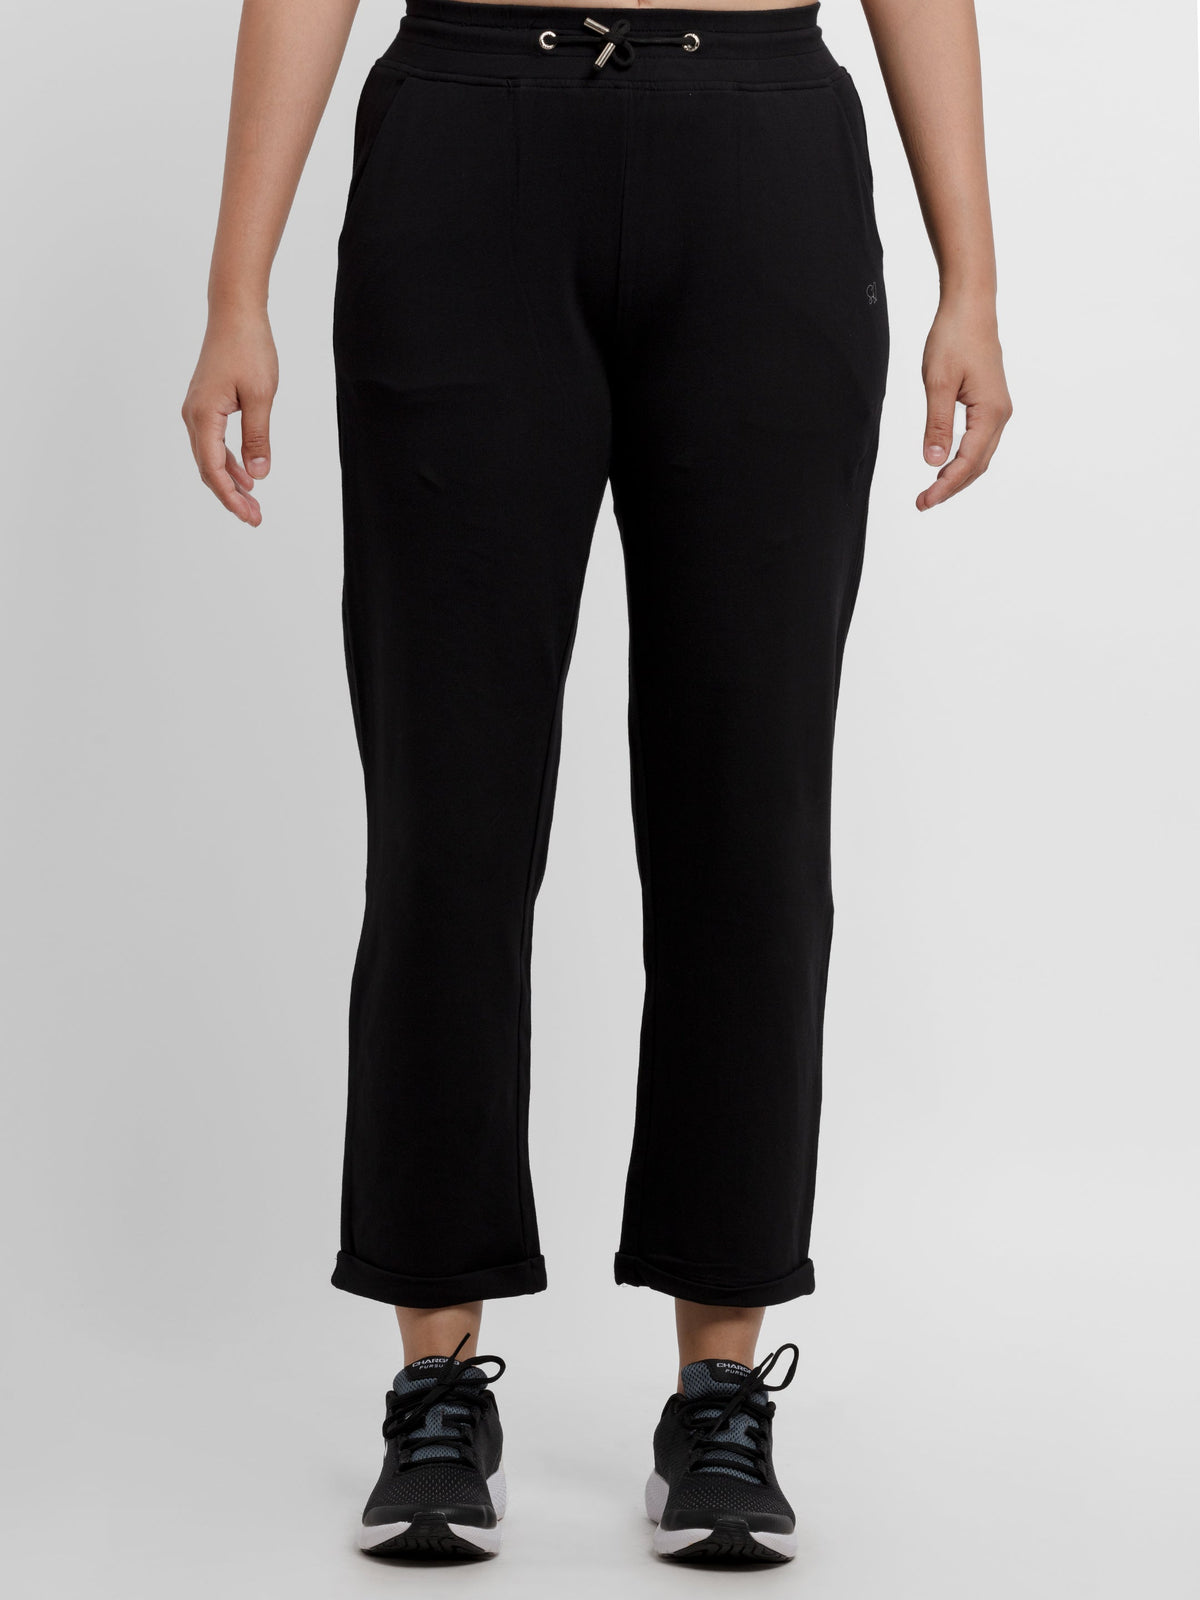 Status Quo |Womens Ankle Length Solid Joggers - S, M, L, XL, XXL,3XL